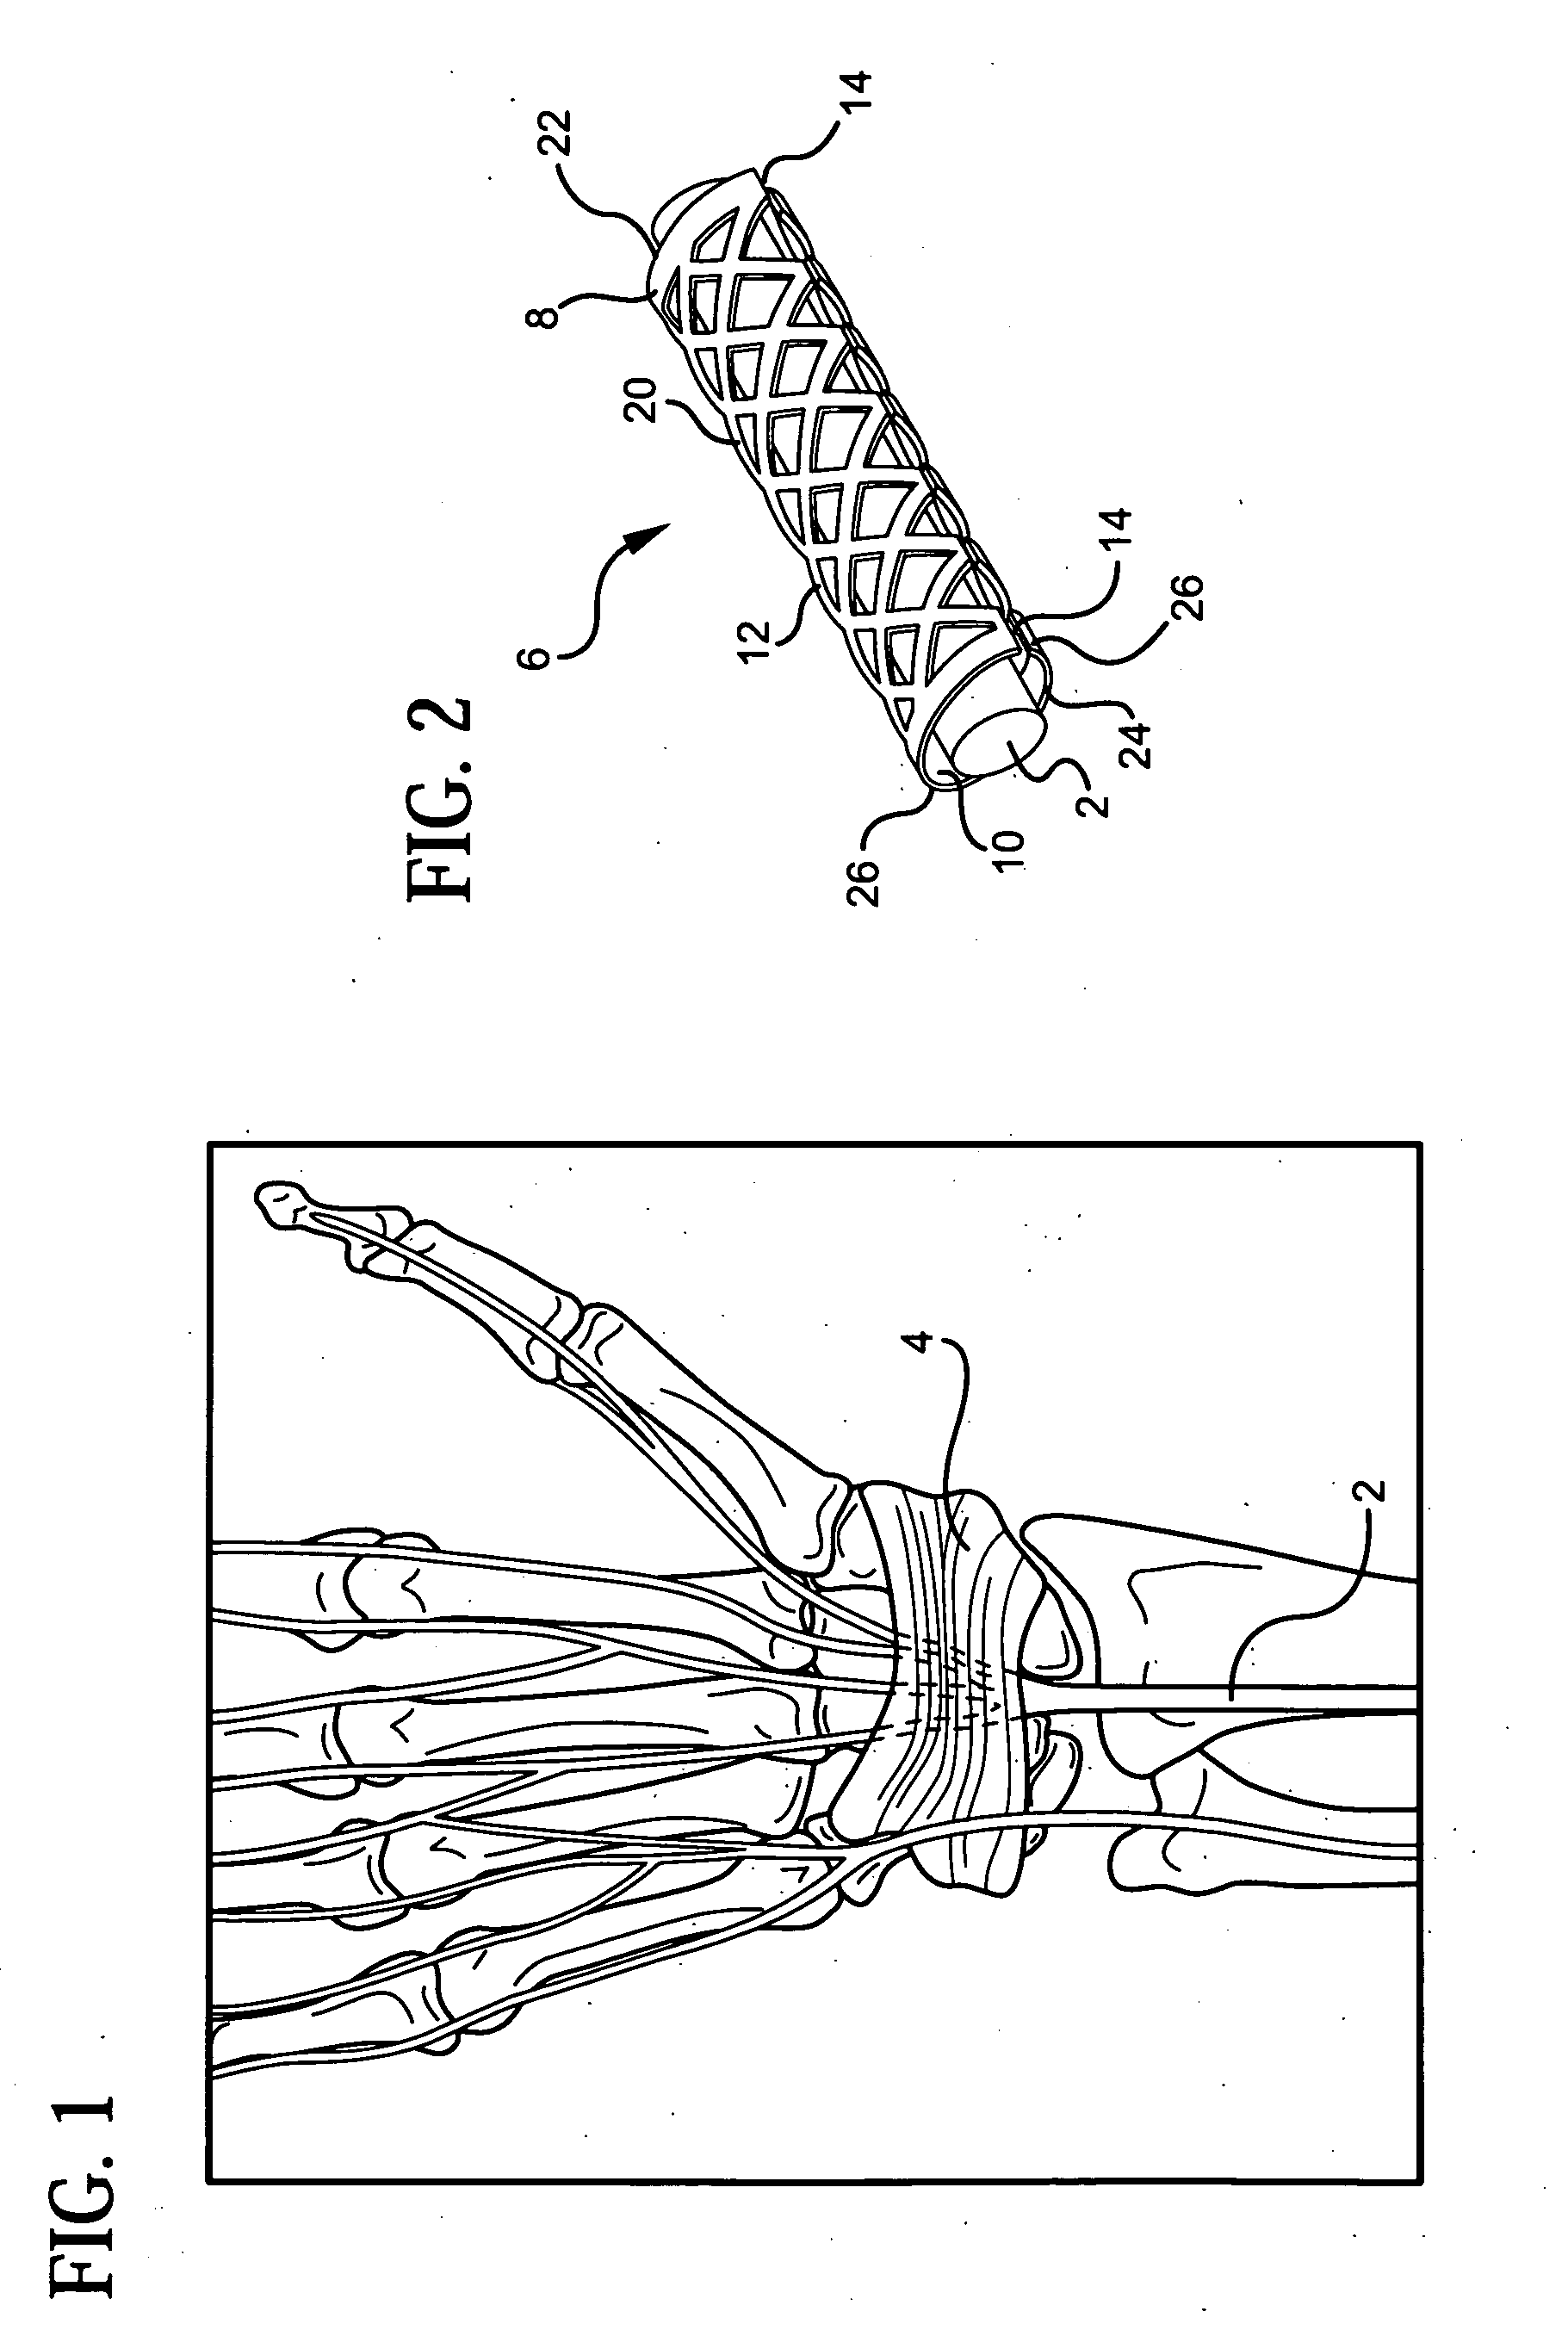 Device for treating carpal tunnel syndrome